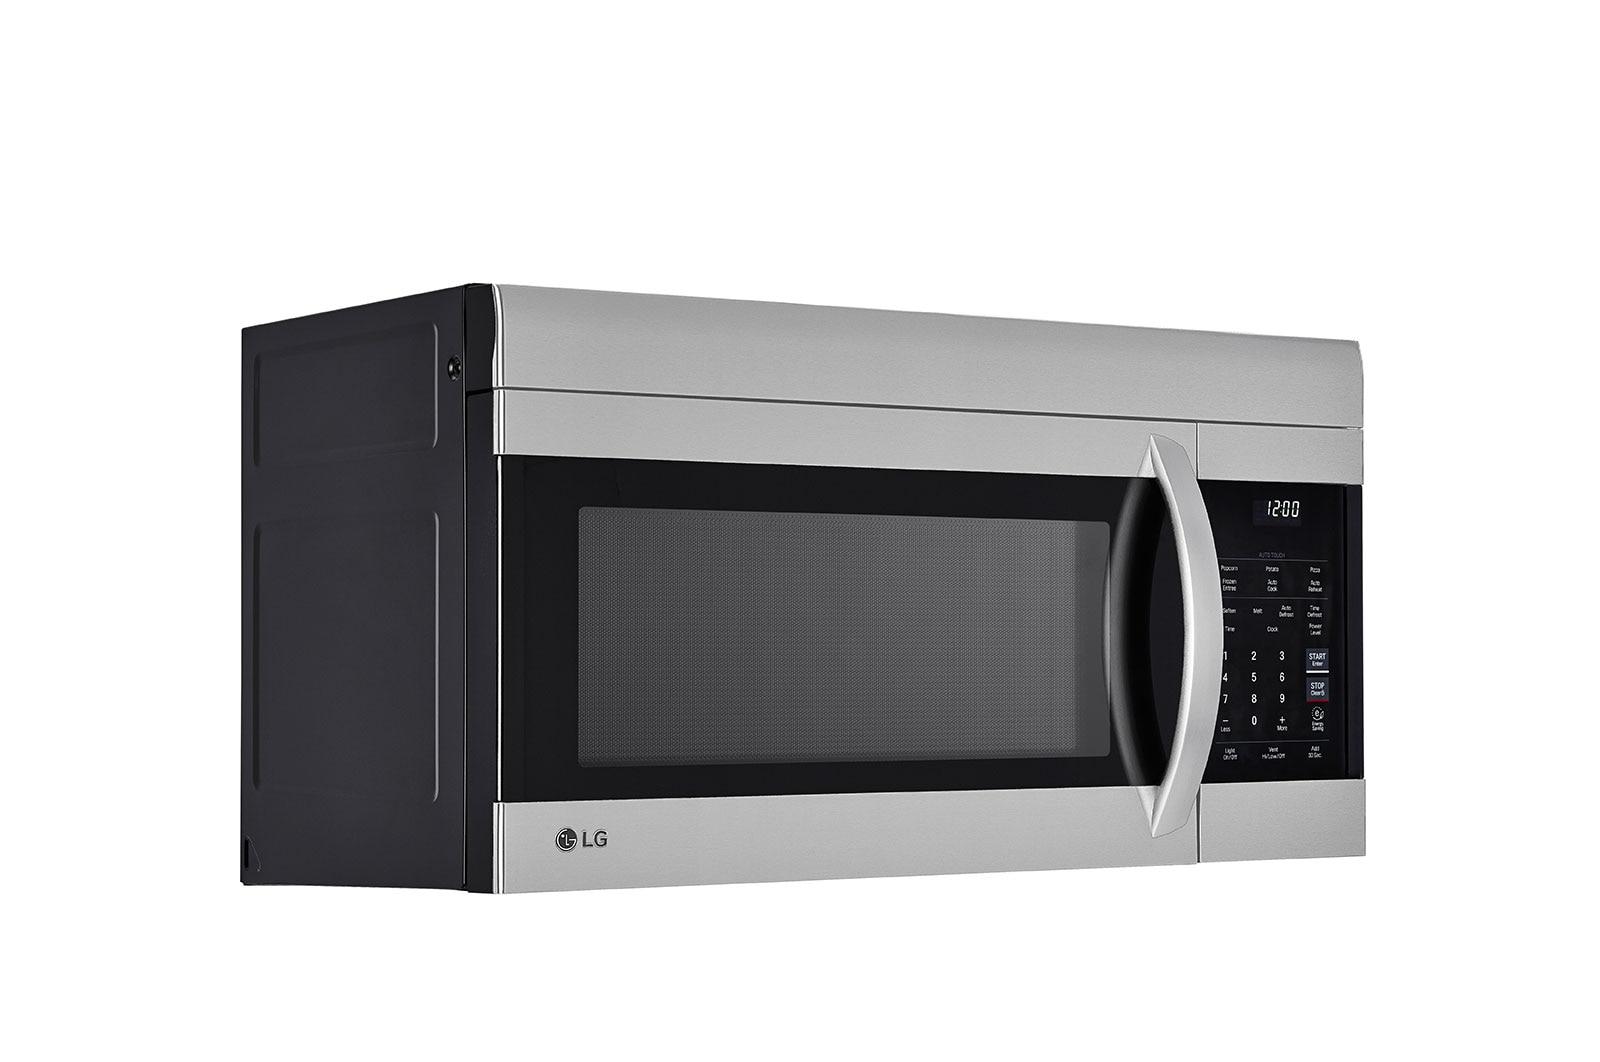 Lg 1.7 cu. ft. Over-the-Range Microwave Oven with EasyClean®